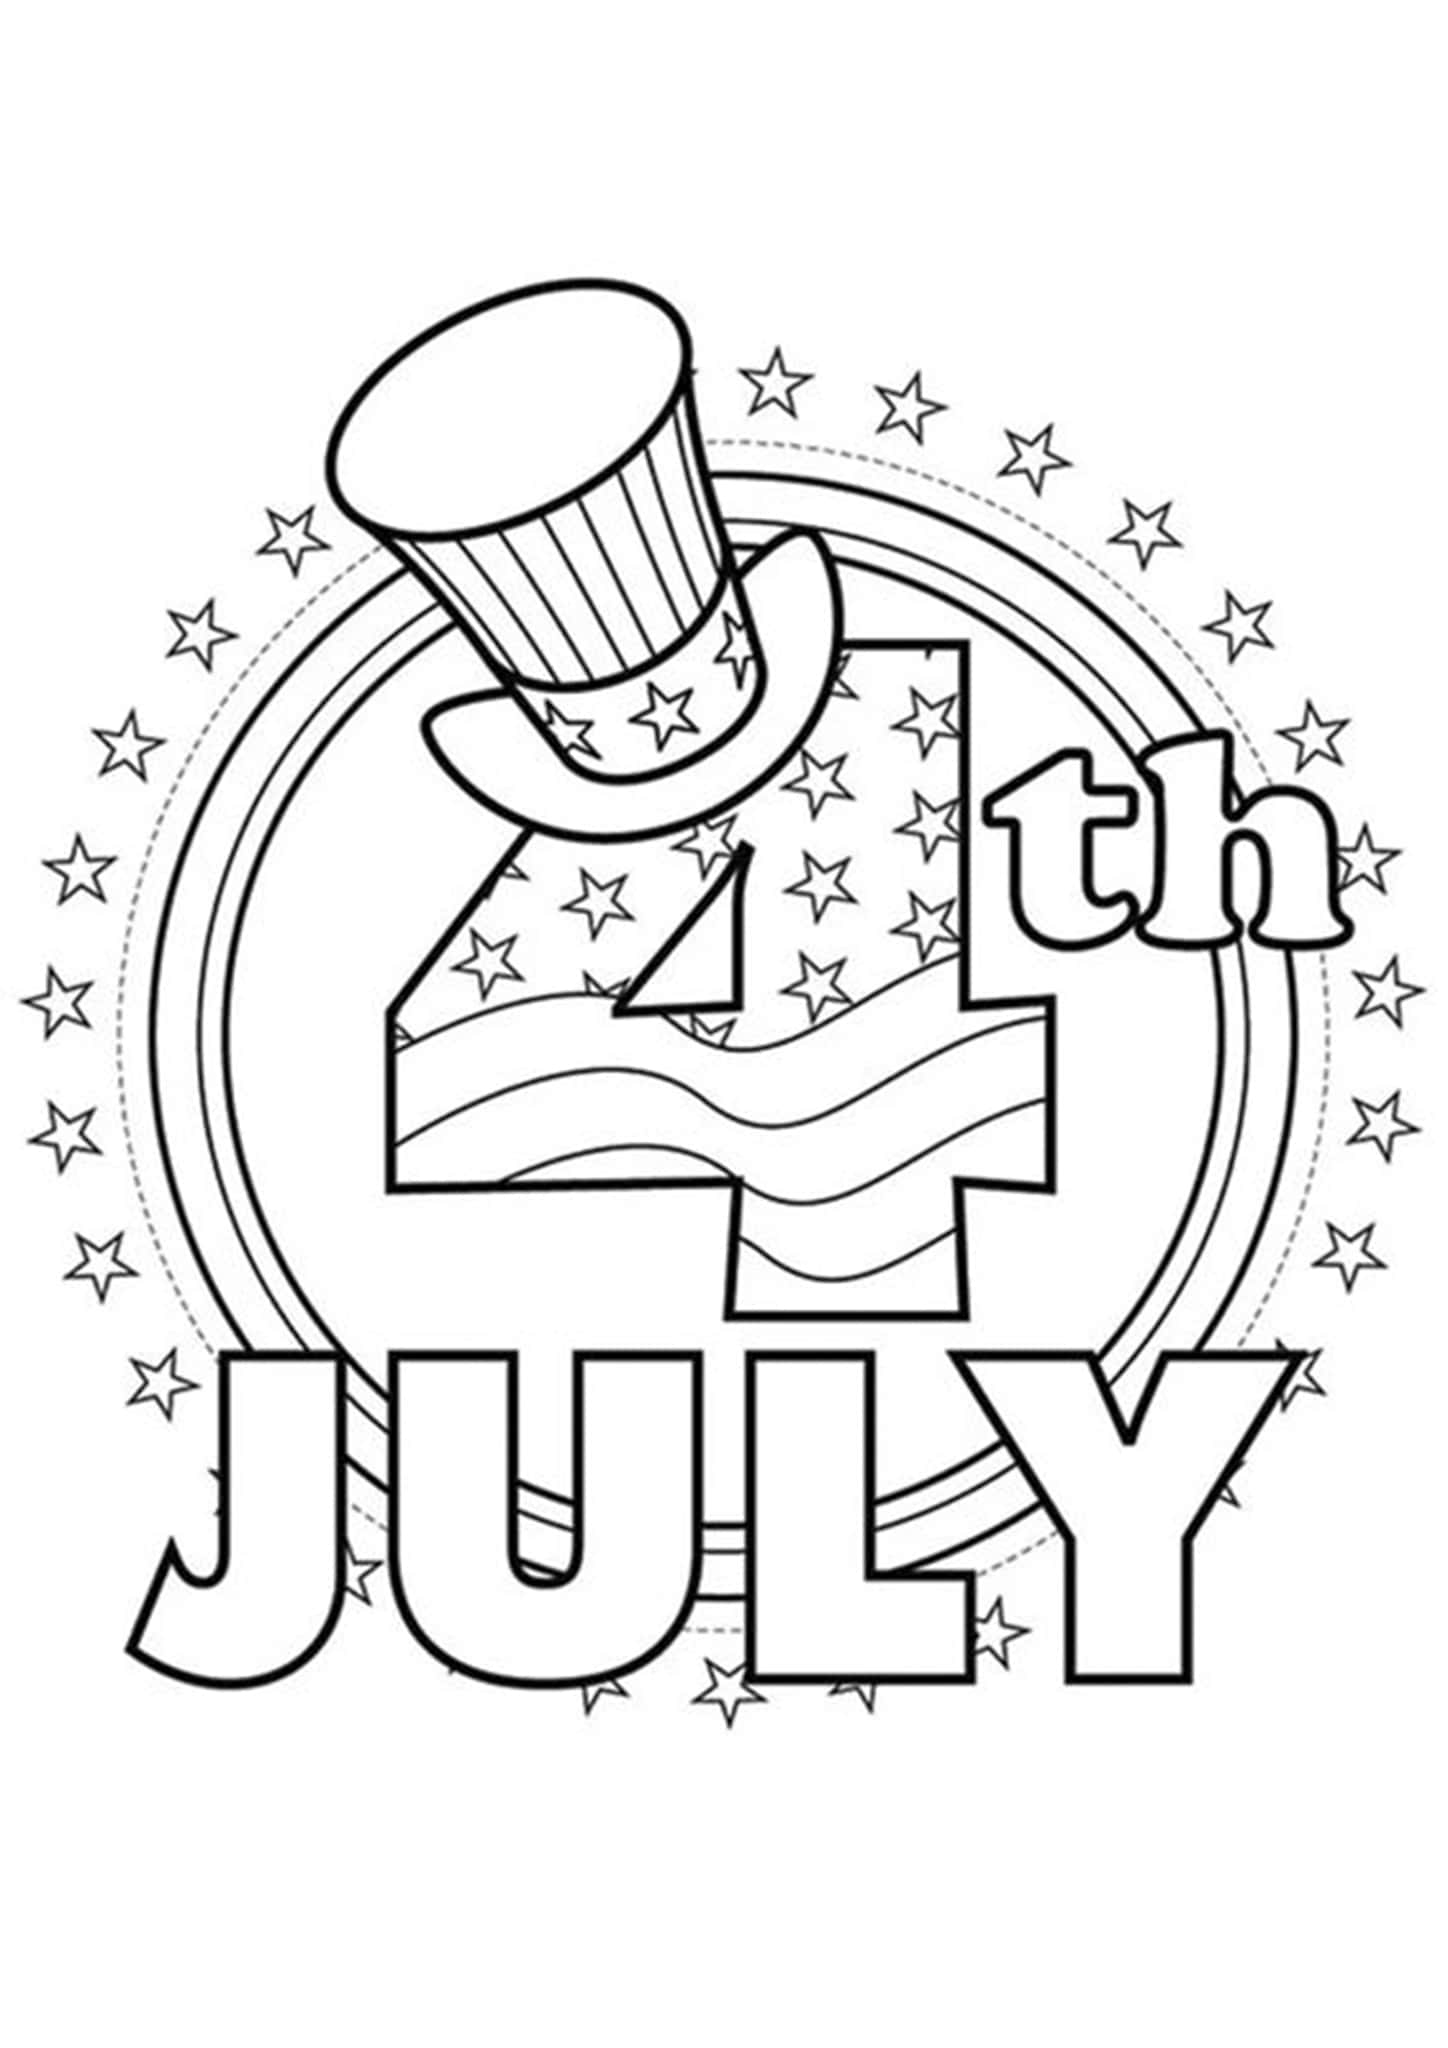 Celebrate Freedom with 4th of July: 180+ Free Coloring Pages 98